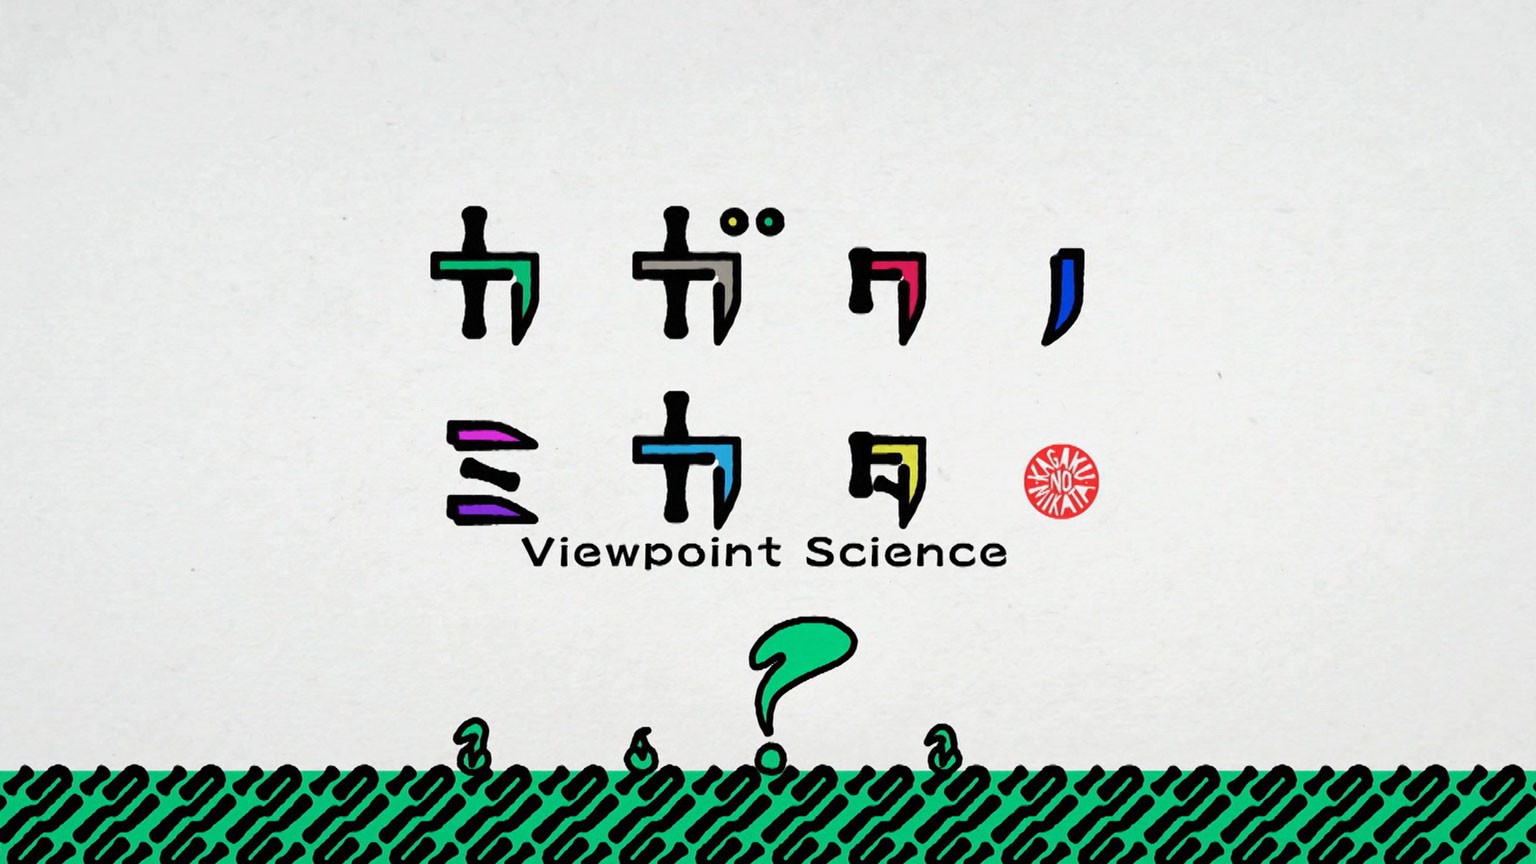 Viewpoint Science